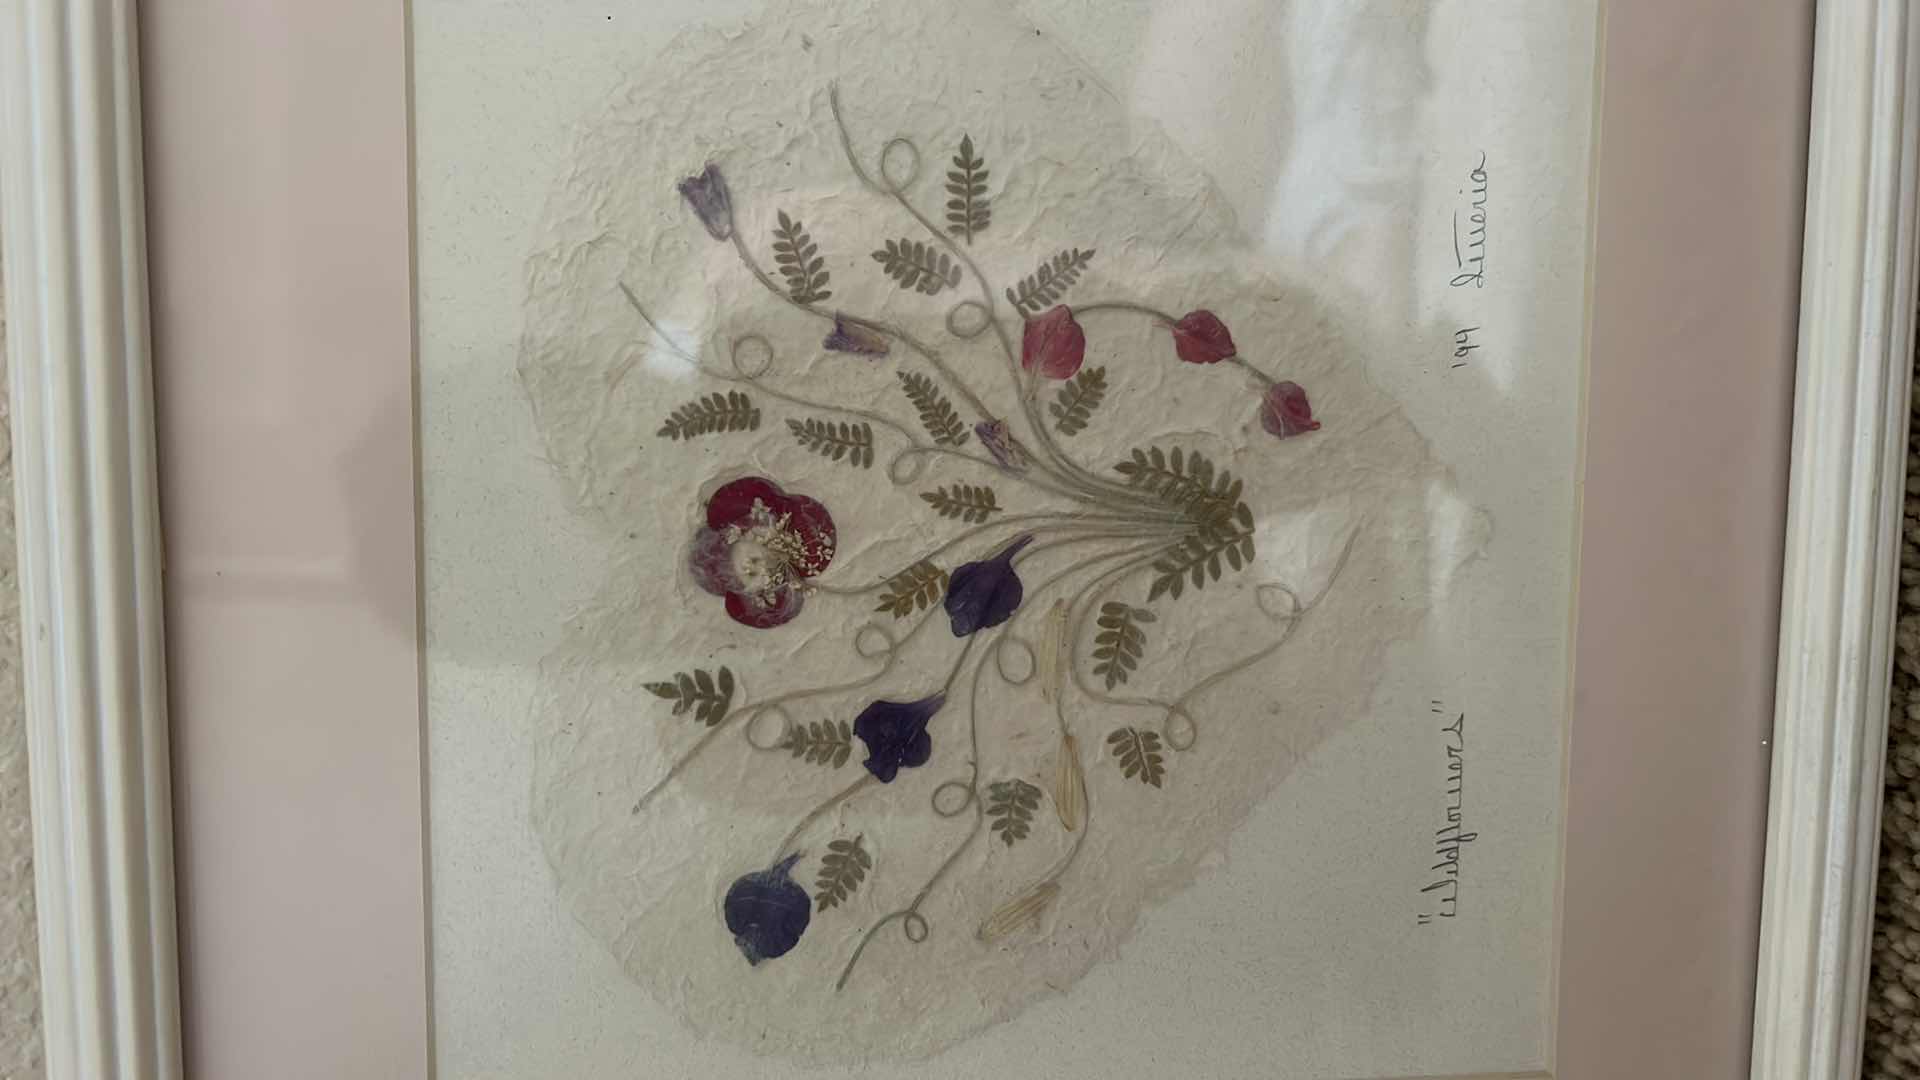 Photo 2 of "Wildflowers" signed pressed flower heart artwork framed 11“ x 11“